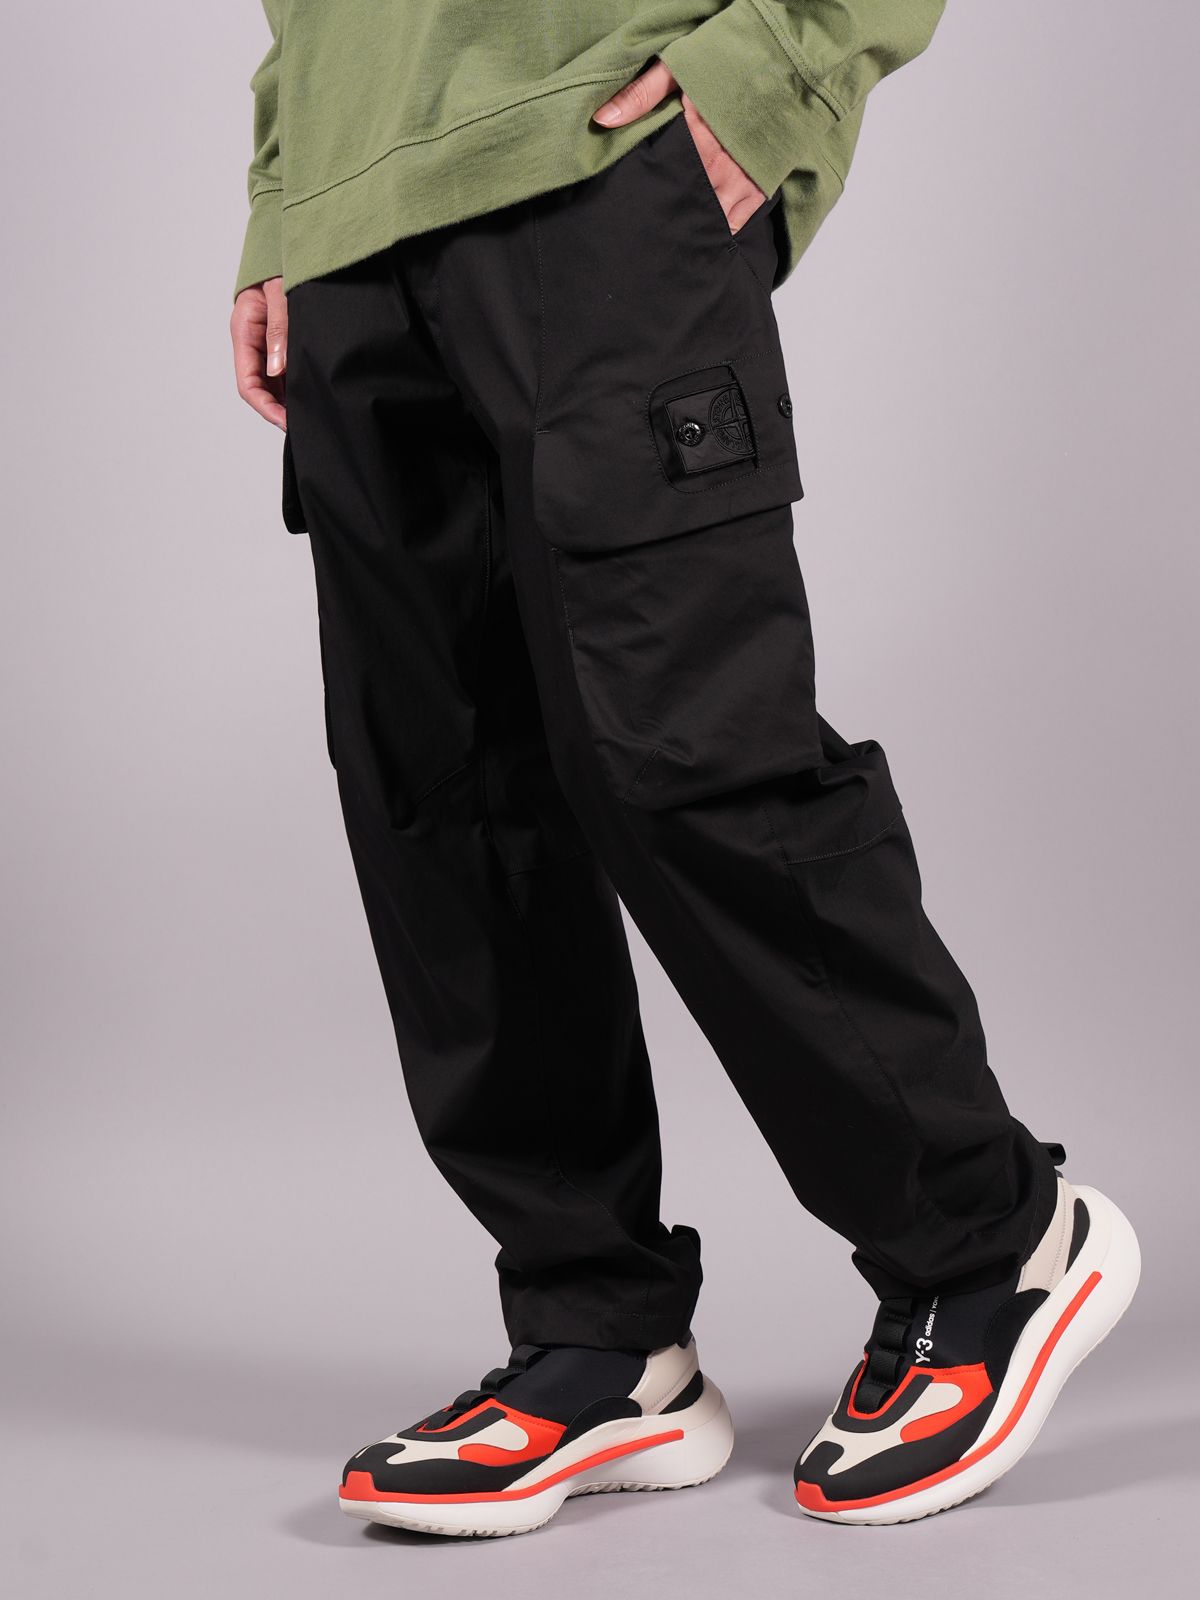 STONE ISLAND SHADOW PROJECT - 30417 CARGO PANTS_CHAPTER 1 / カーゴ